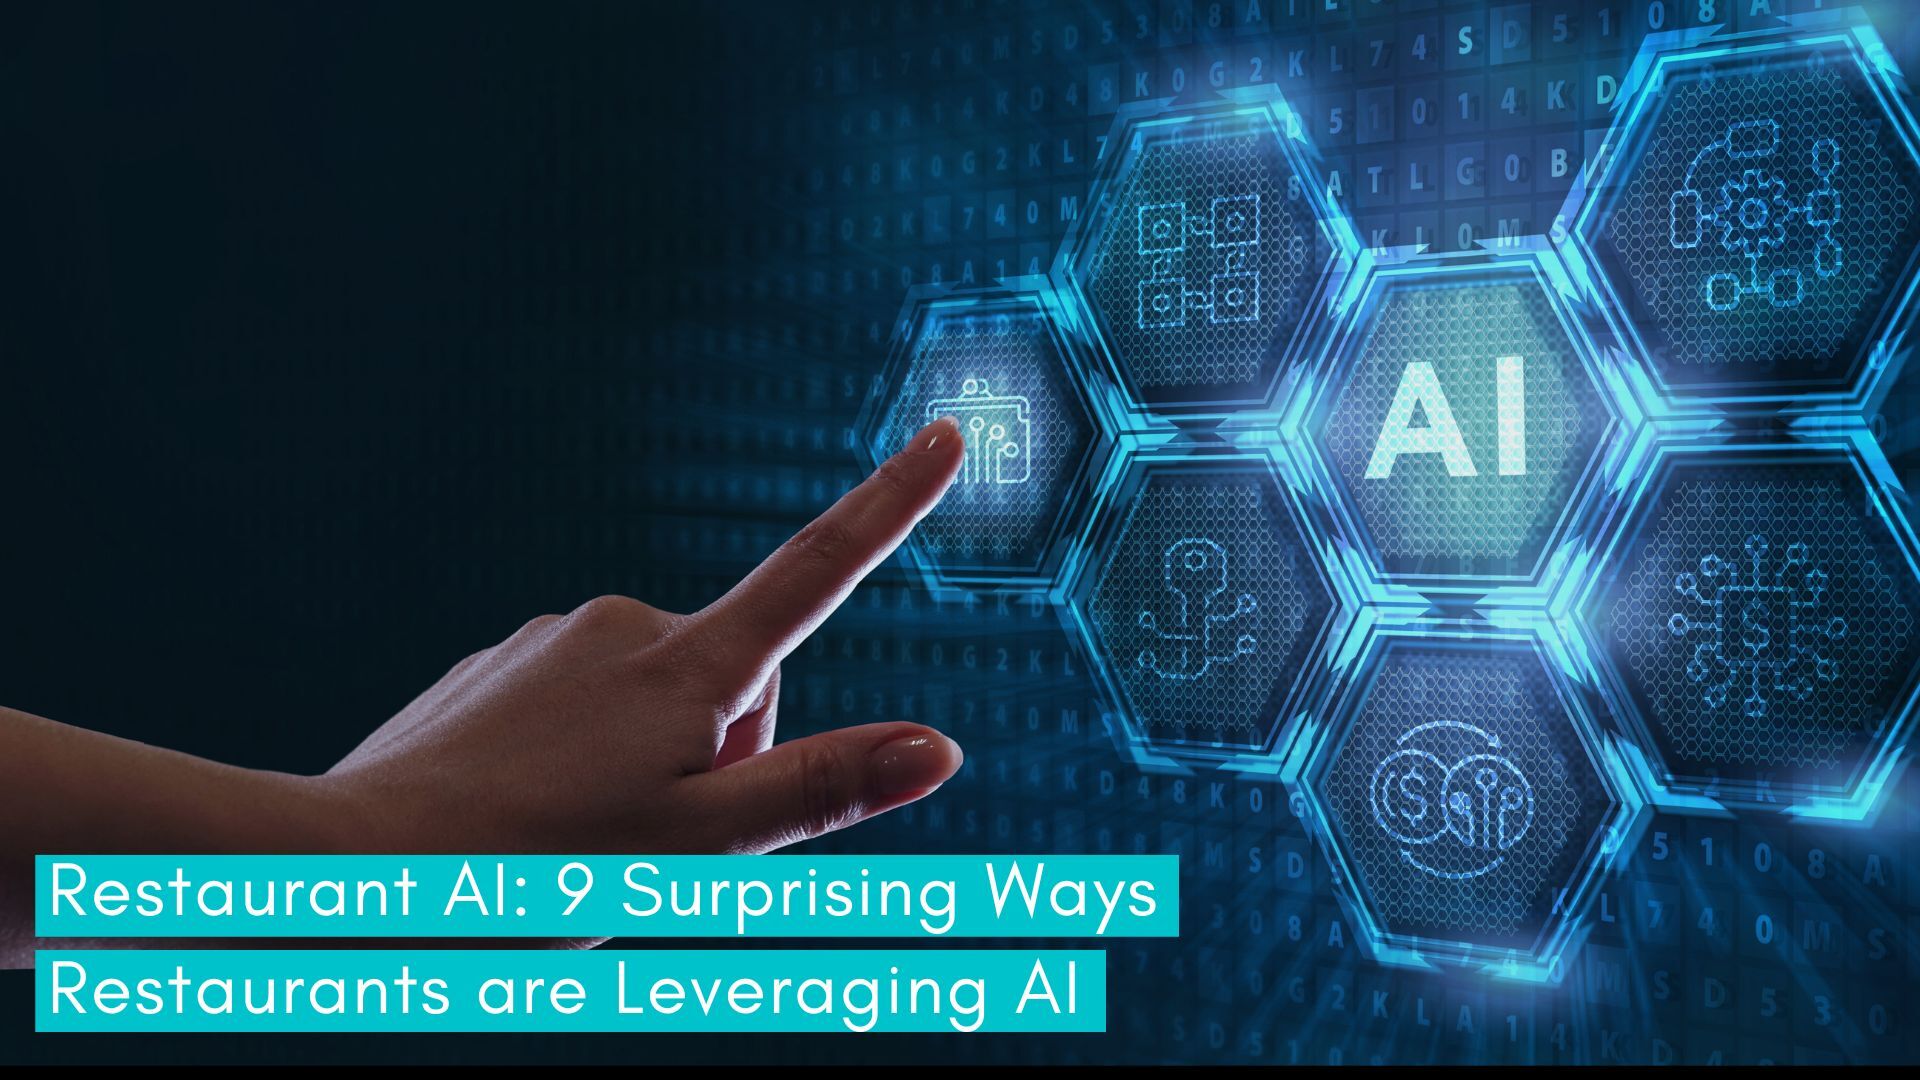 You are currently viewing Restaurant AI: 9 Surprising Ways Restaurants are Leveraging AI